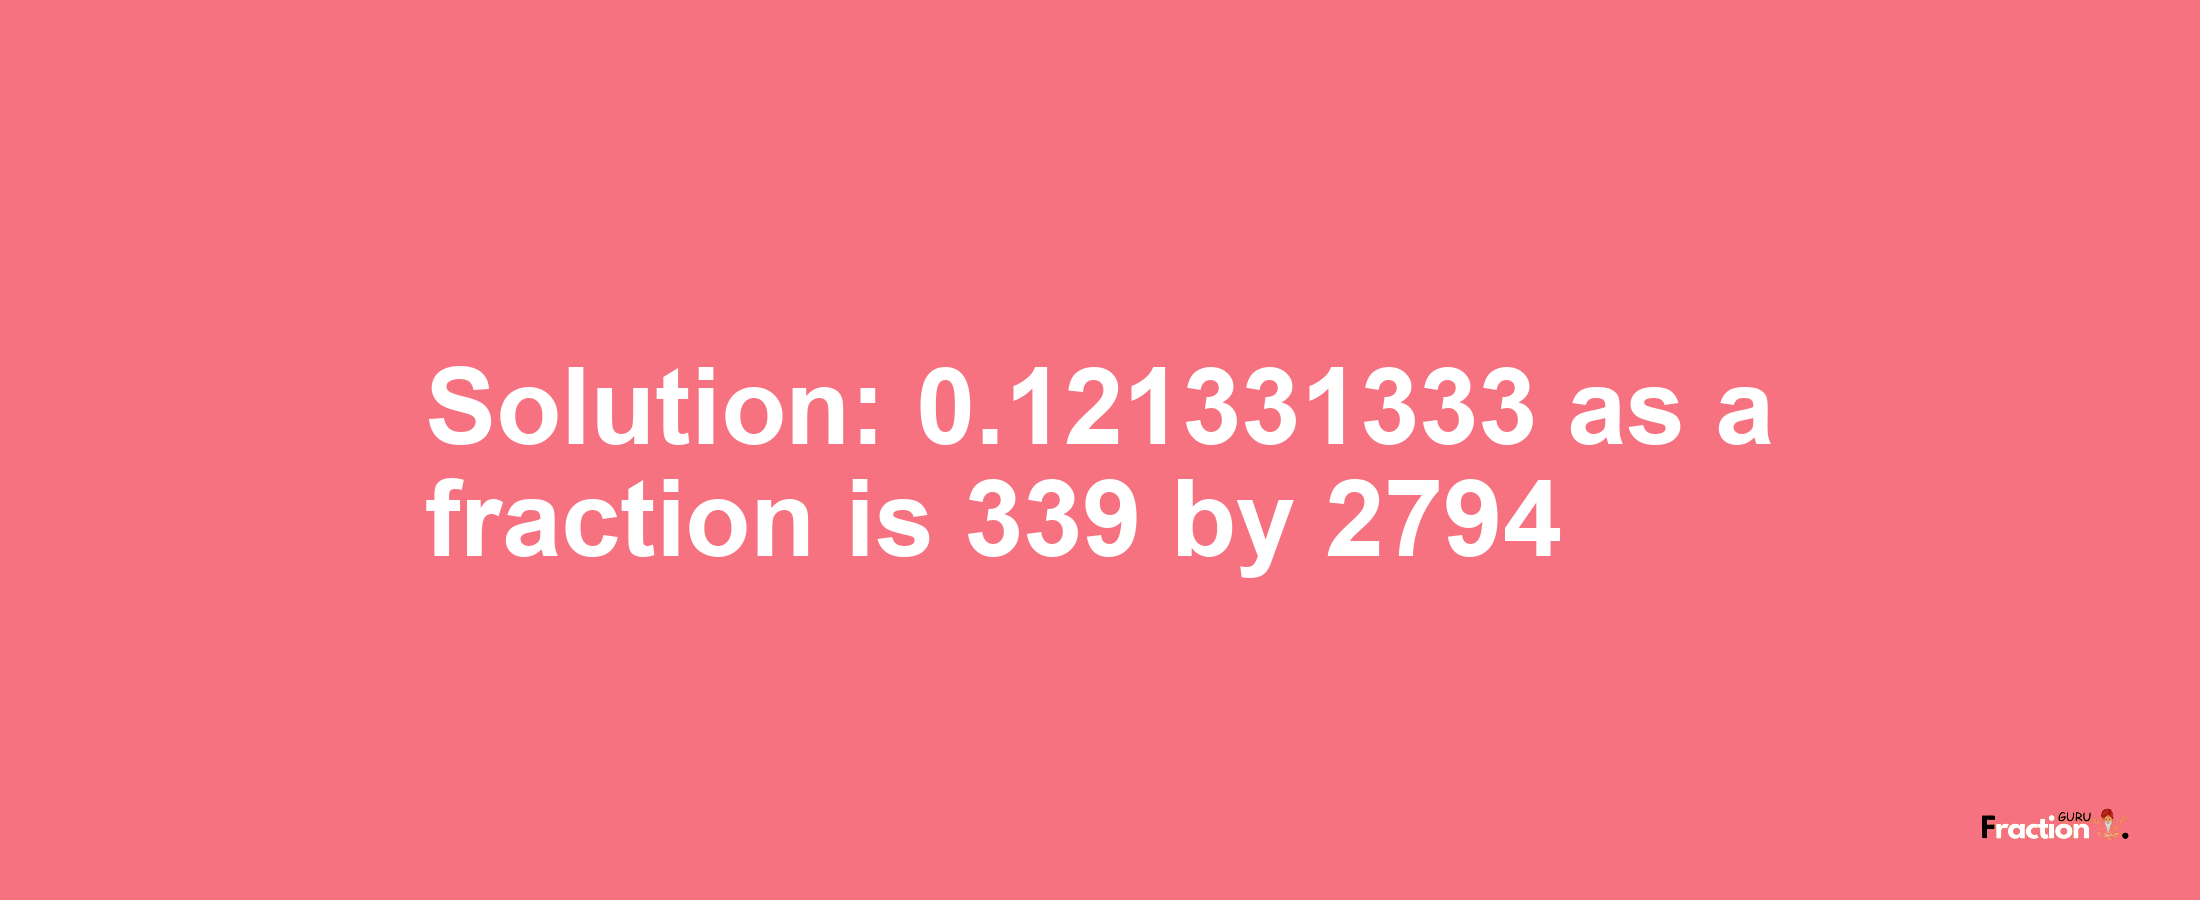 Solution:0.121331333 as a fraction is 339/2794